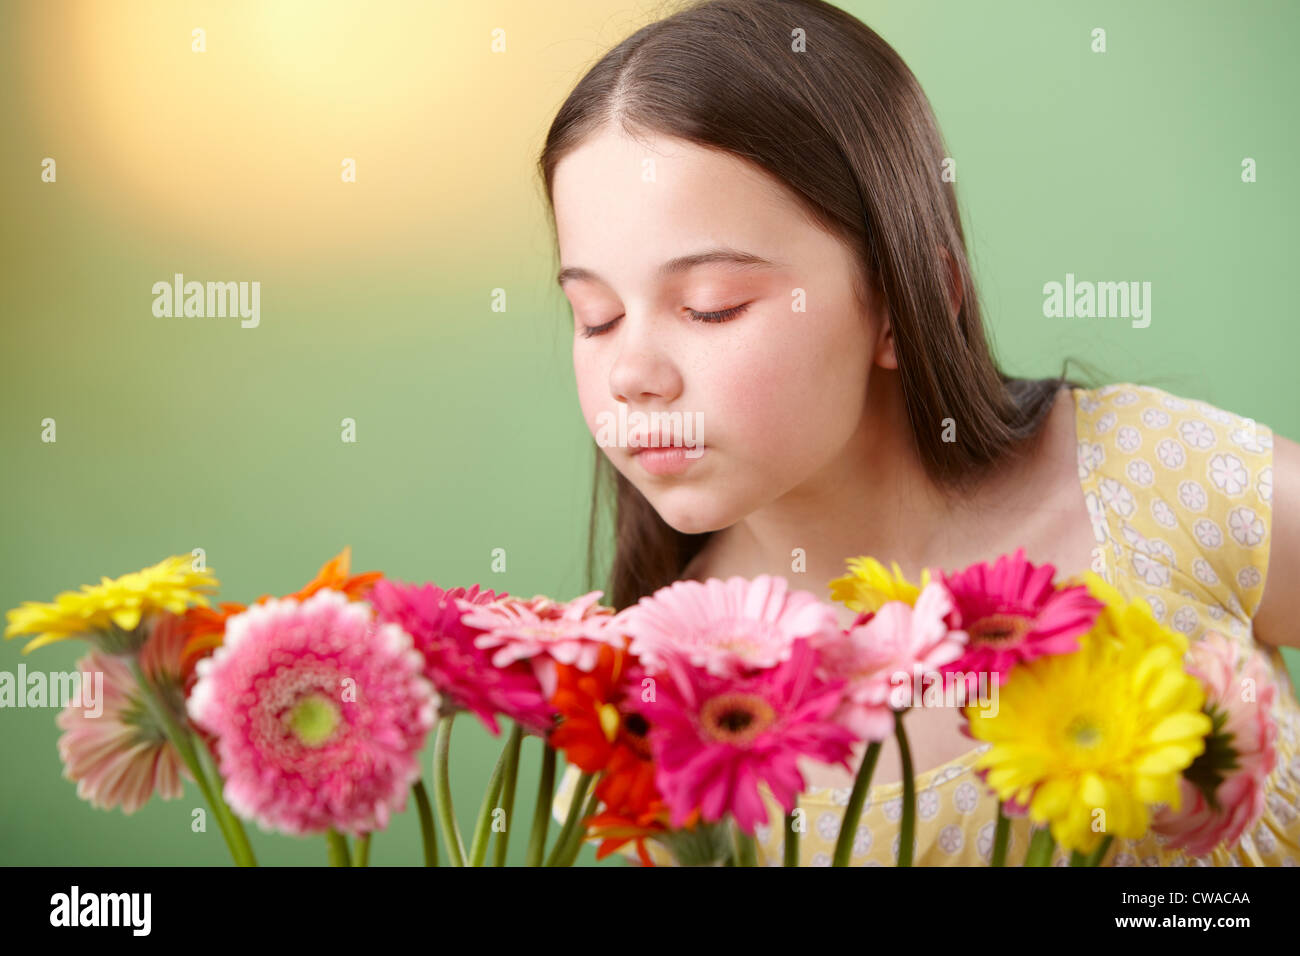 Girl sniffing flowers Stock Photo